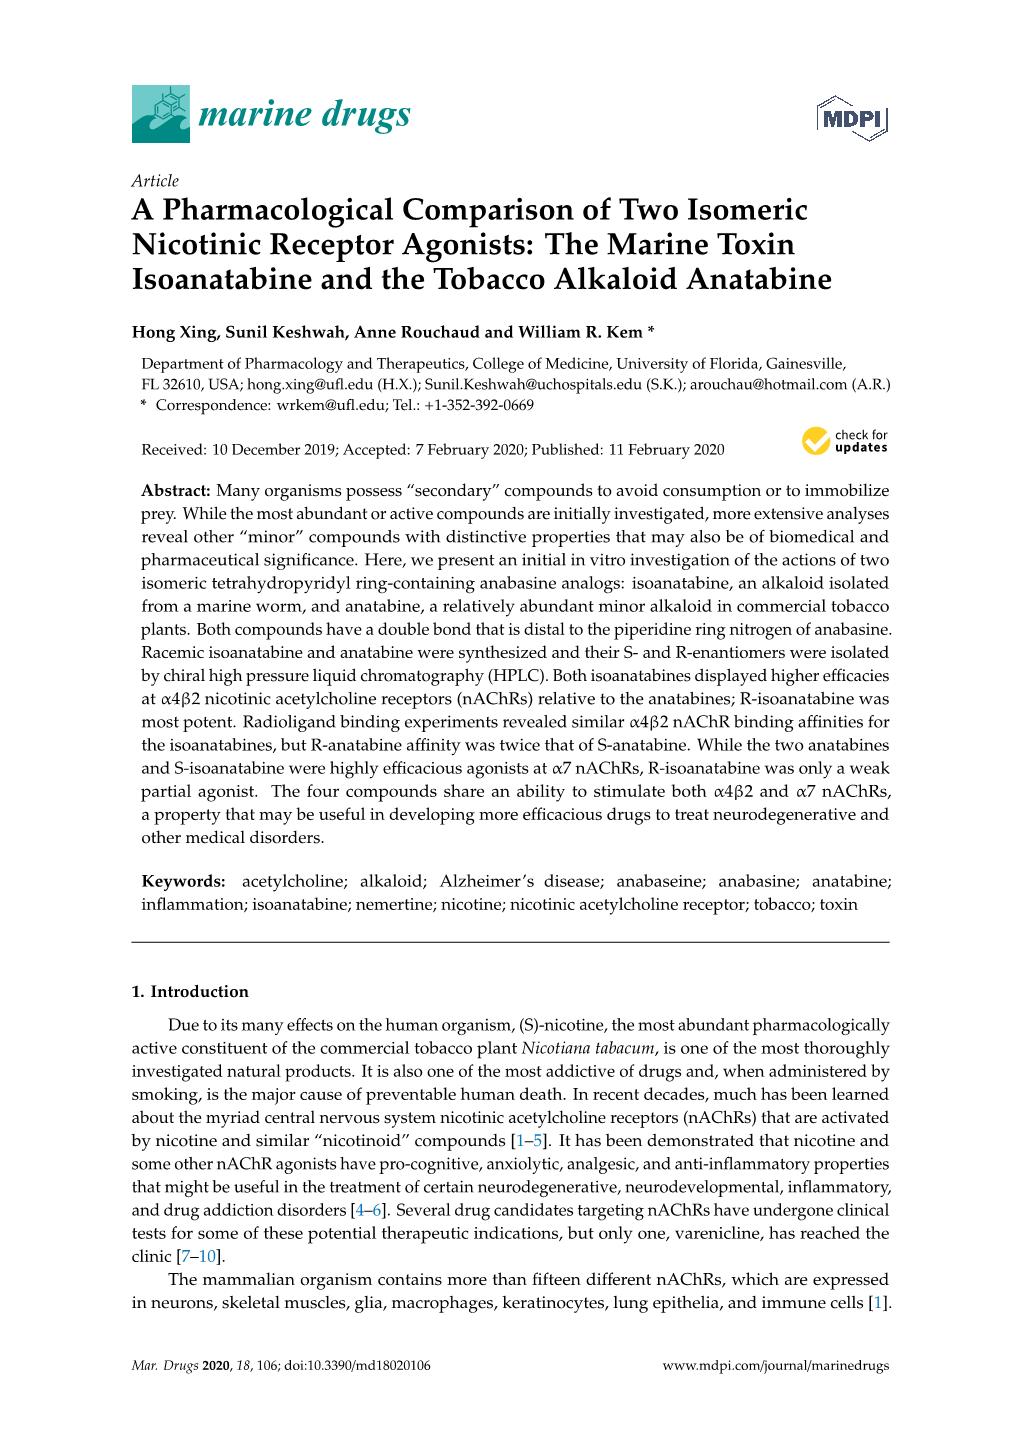 A Pharmacological Comparison of Two Isomeric Nicotinic Receptor Agonists: the Marine Toxin Isoanatabine and the Tobacco Alkaloid Anatabine